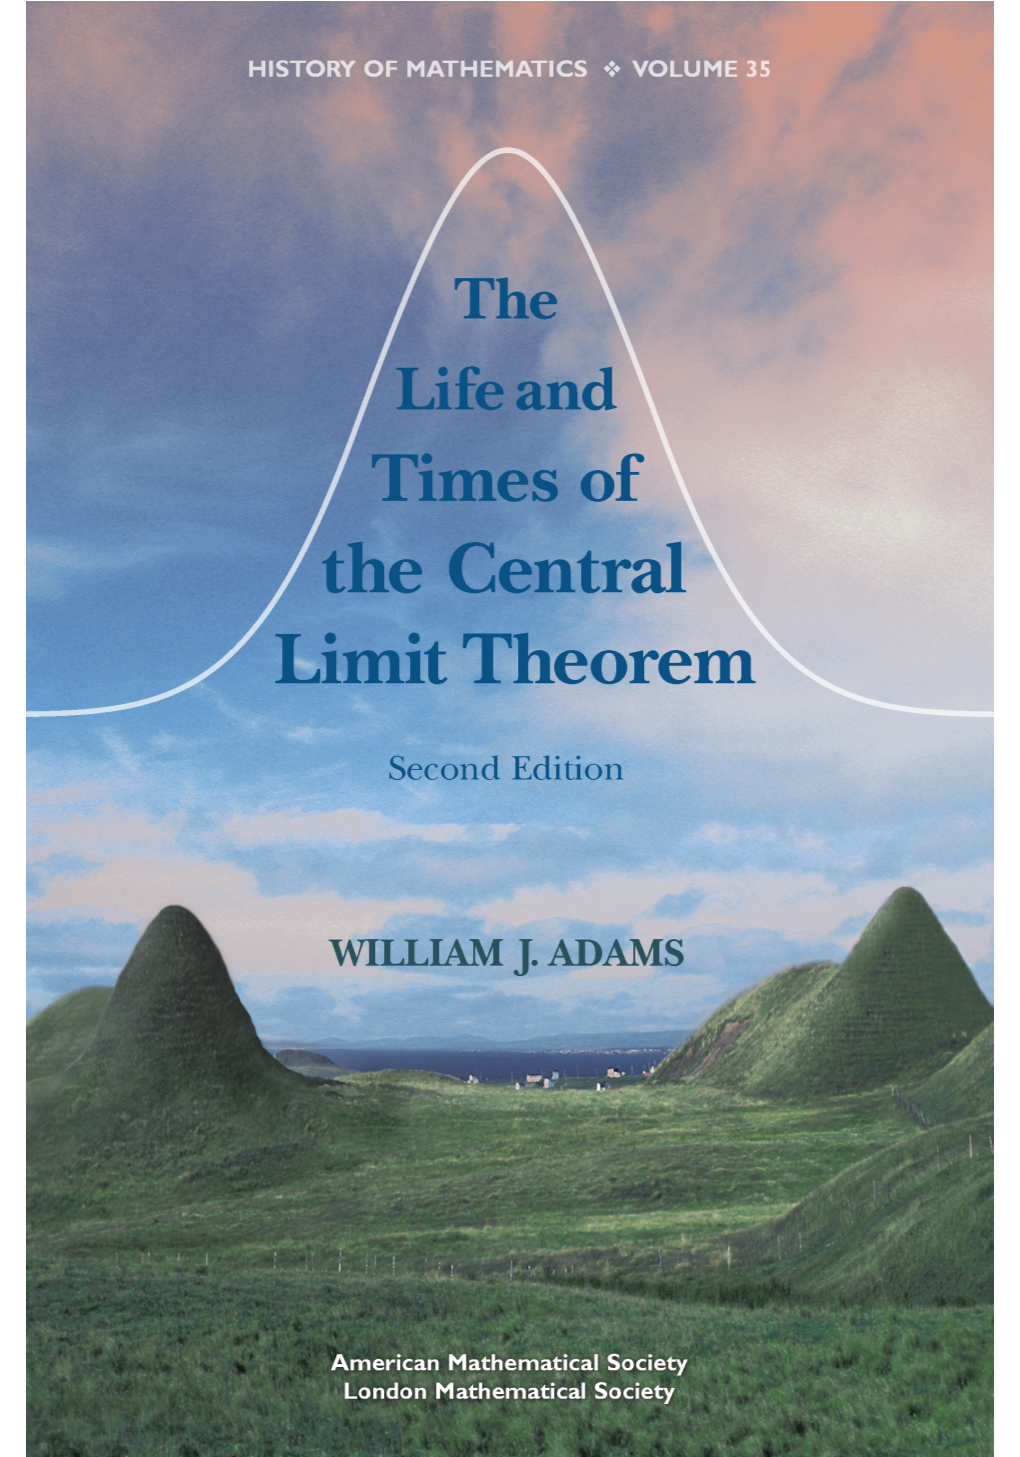 The Life and Times of the Central Limit Theorem / William J